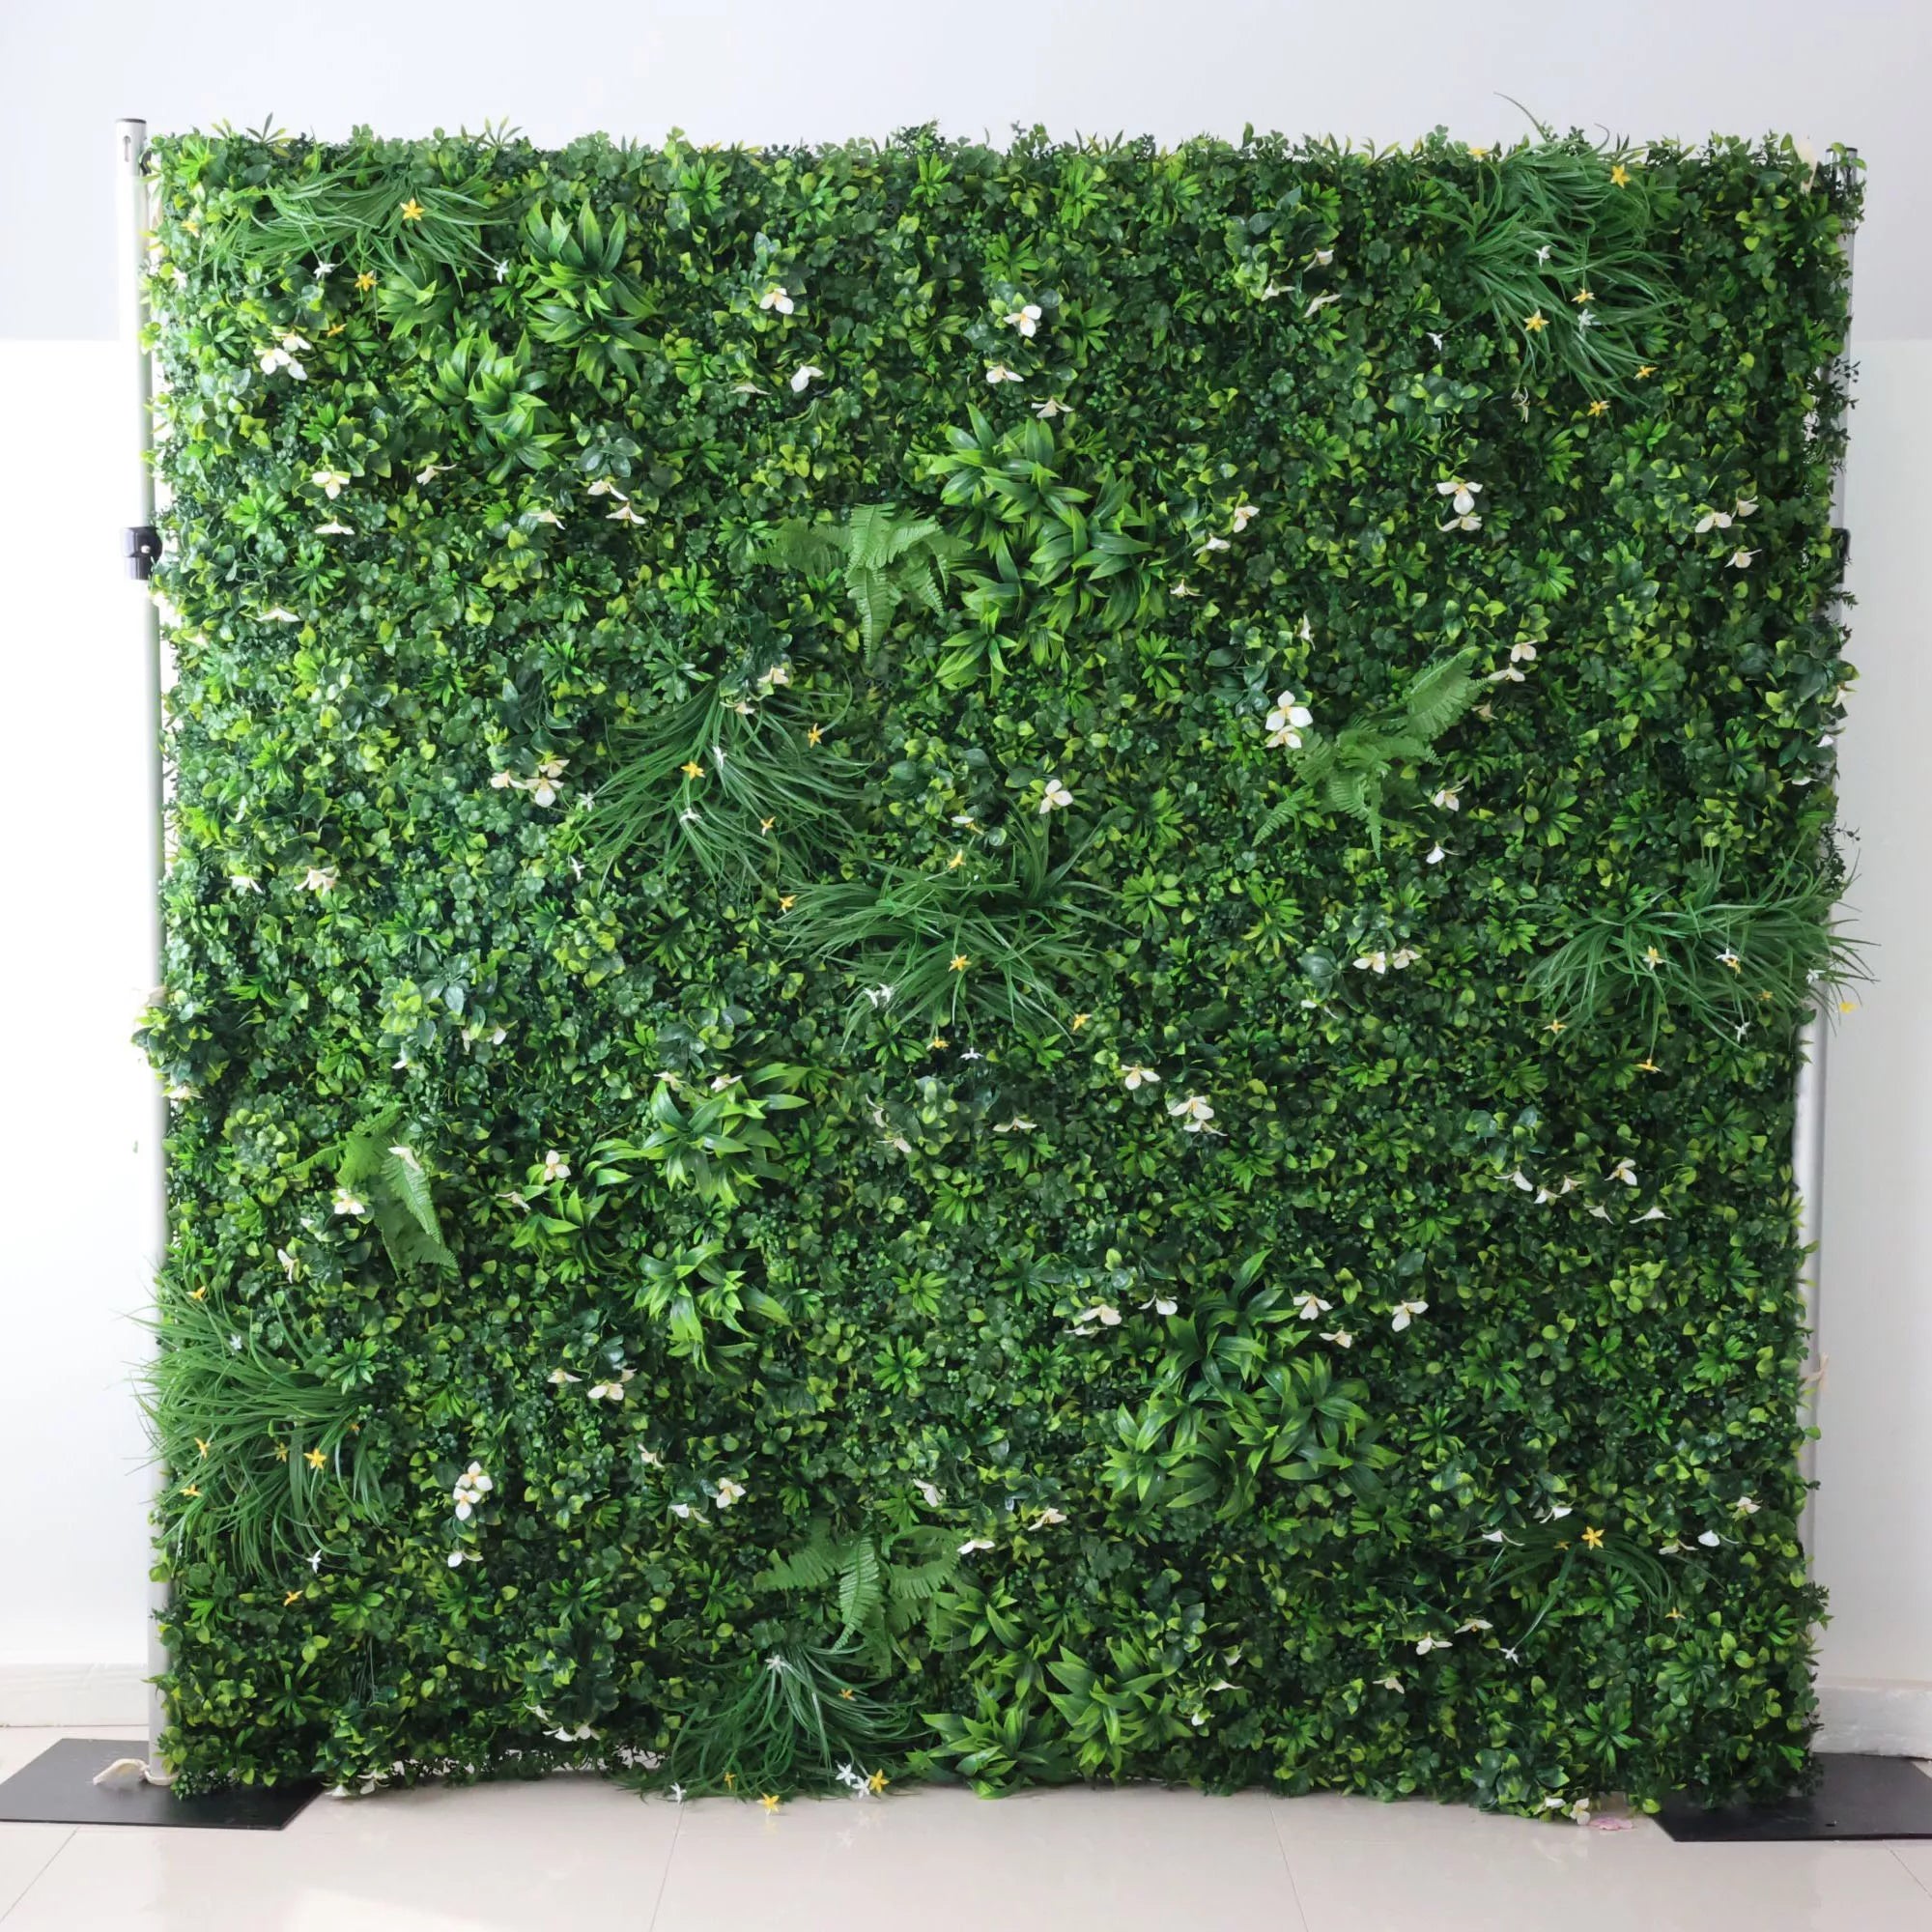 Valar Flowers Roll Up Fabric Artificial Vivid Green Grass Wall Wedding Backdrop, Floral Party Decor, Event Photography-VF-086-4